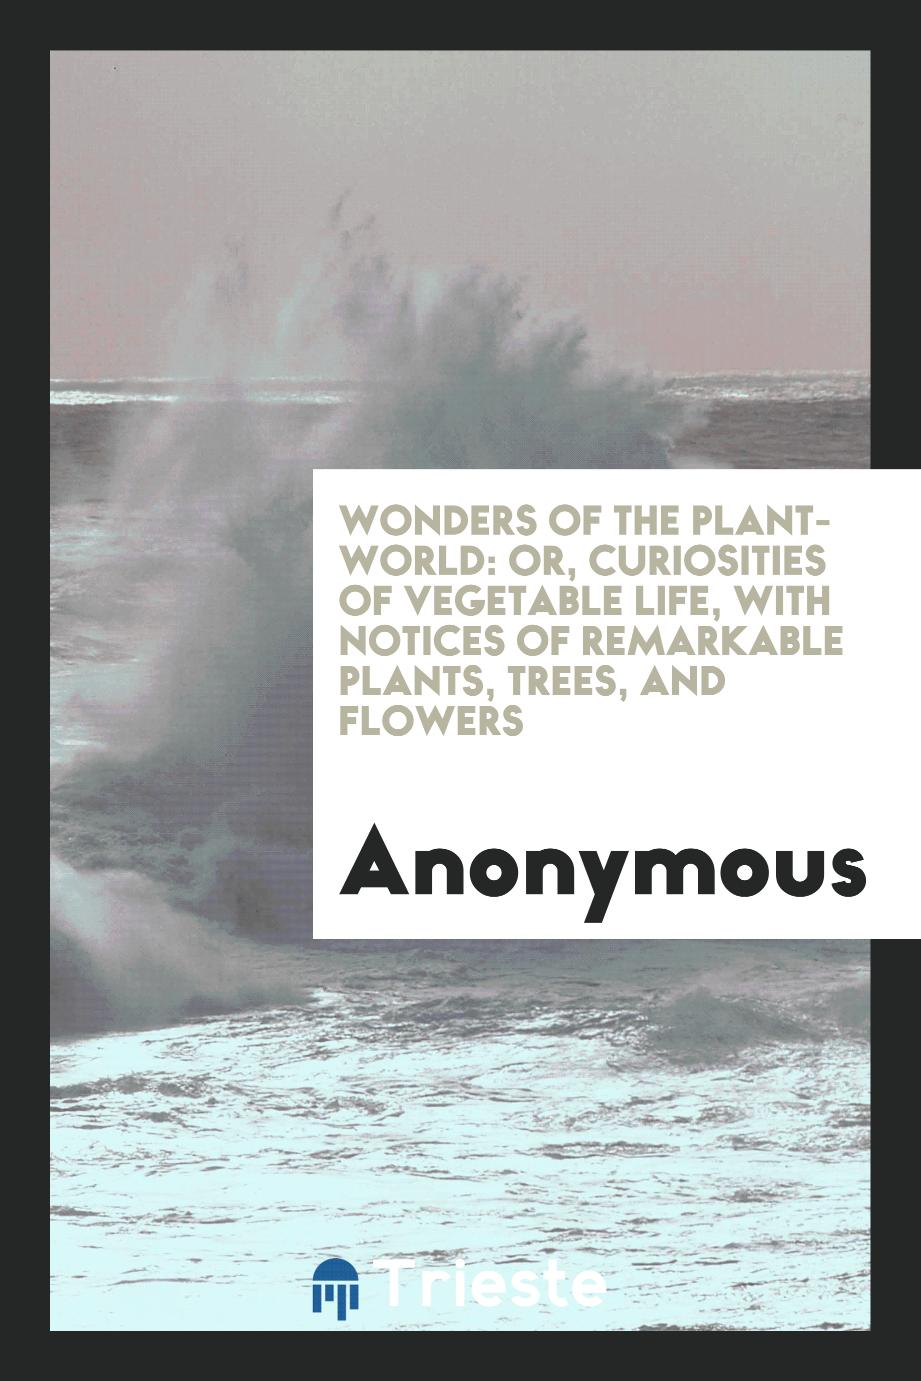 Wonders of the Plant-World: Or, Curiosities of Vegetable Life, with Notices of Remarkable Plants, Trees, and Flowers